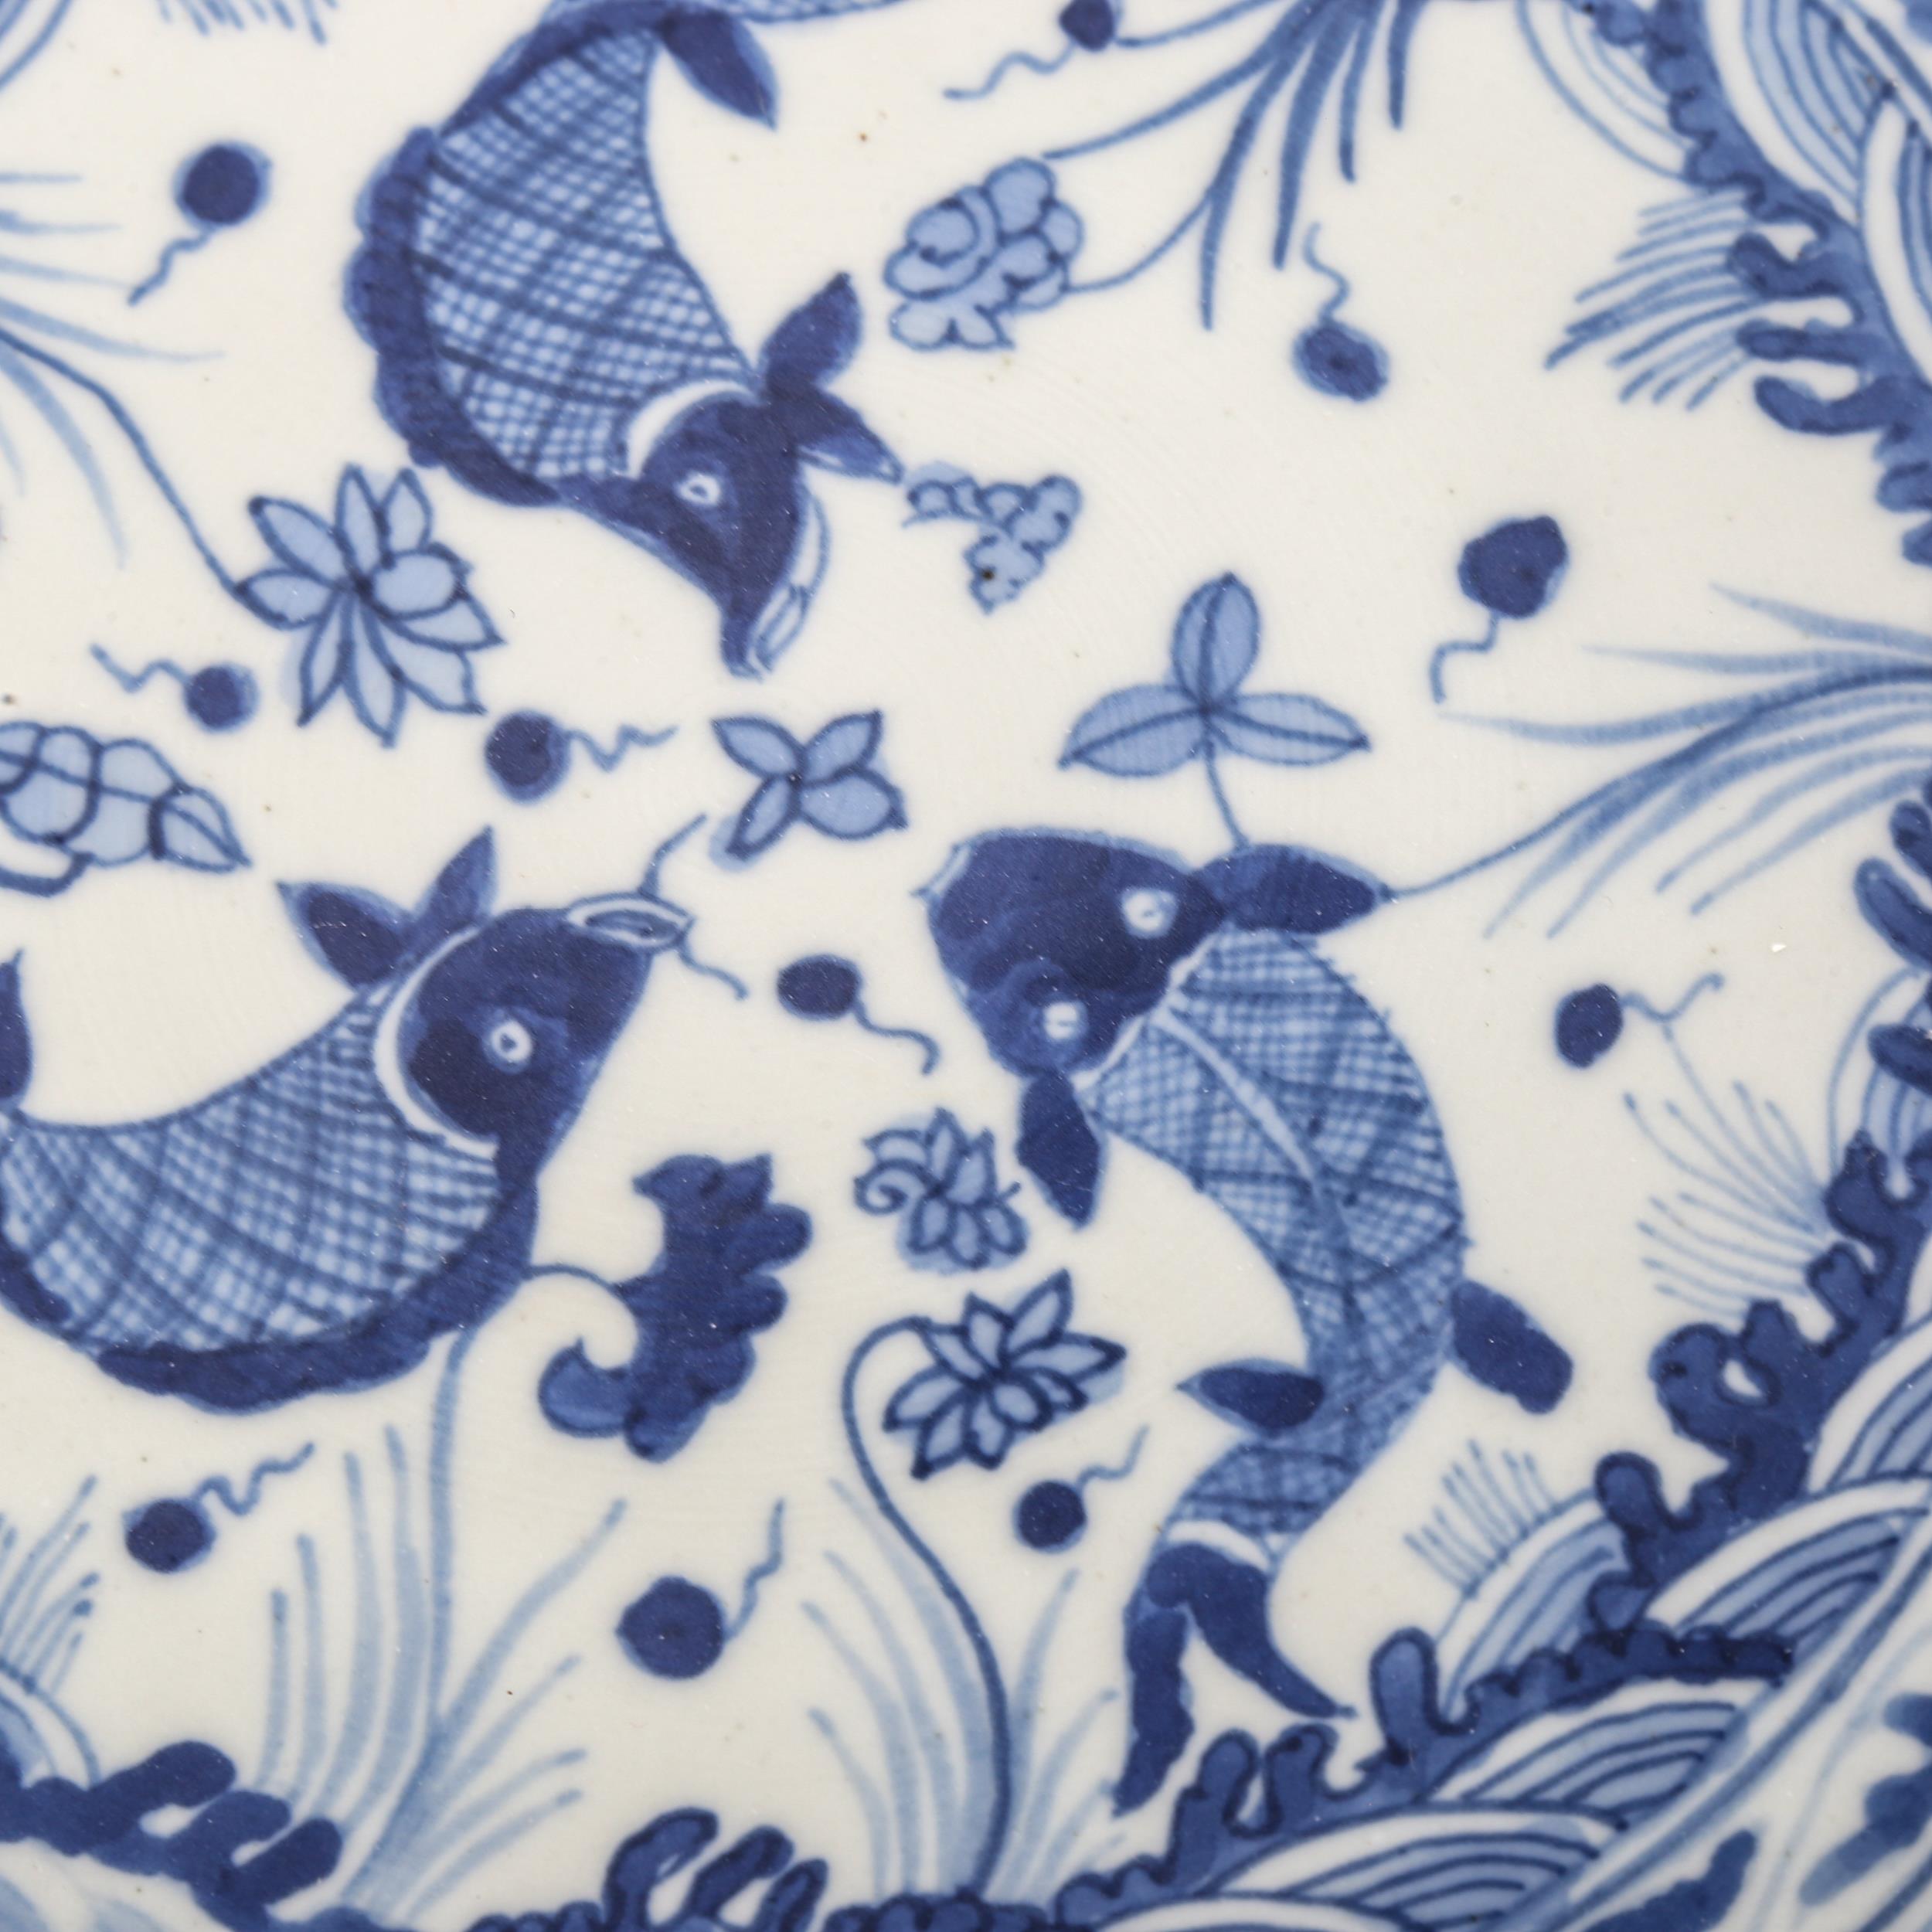 A Chinese blue and white porcelain bowl with fish decoration, 6 character mark, diameter 36cm - Image 2 of 3